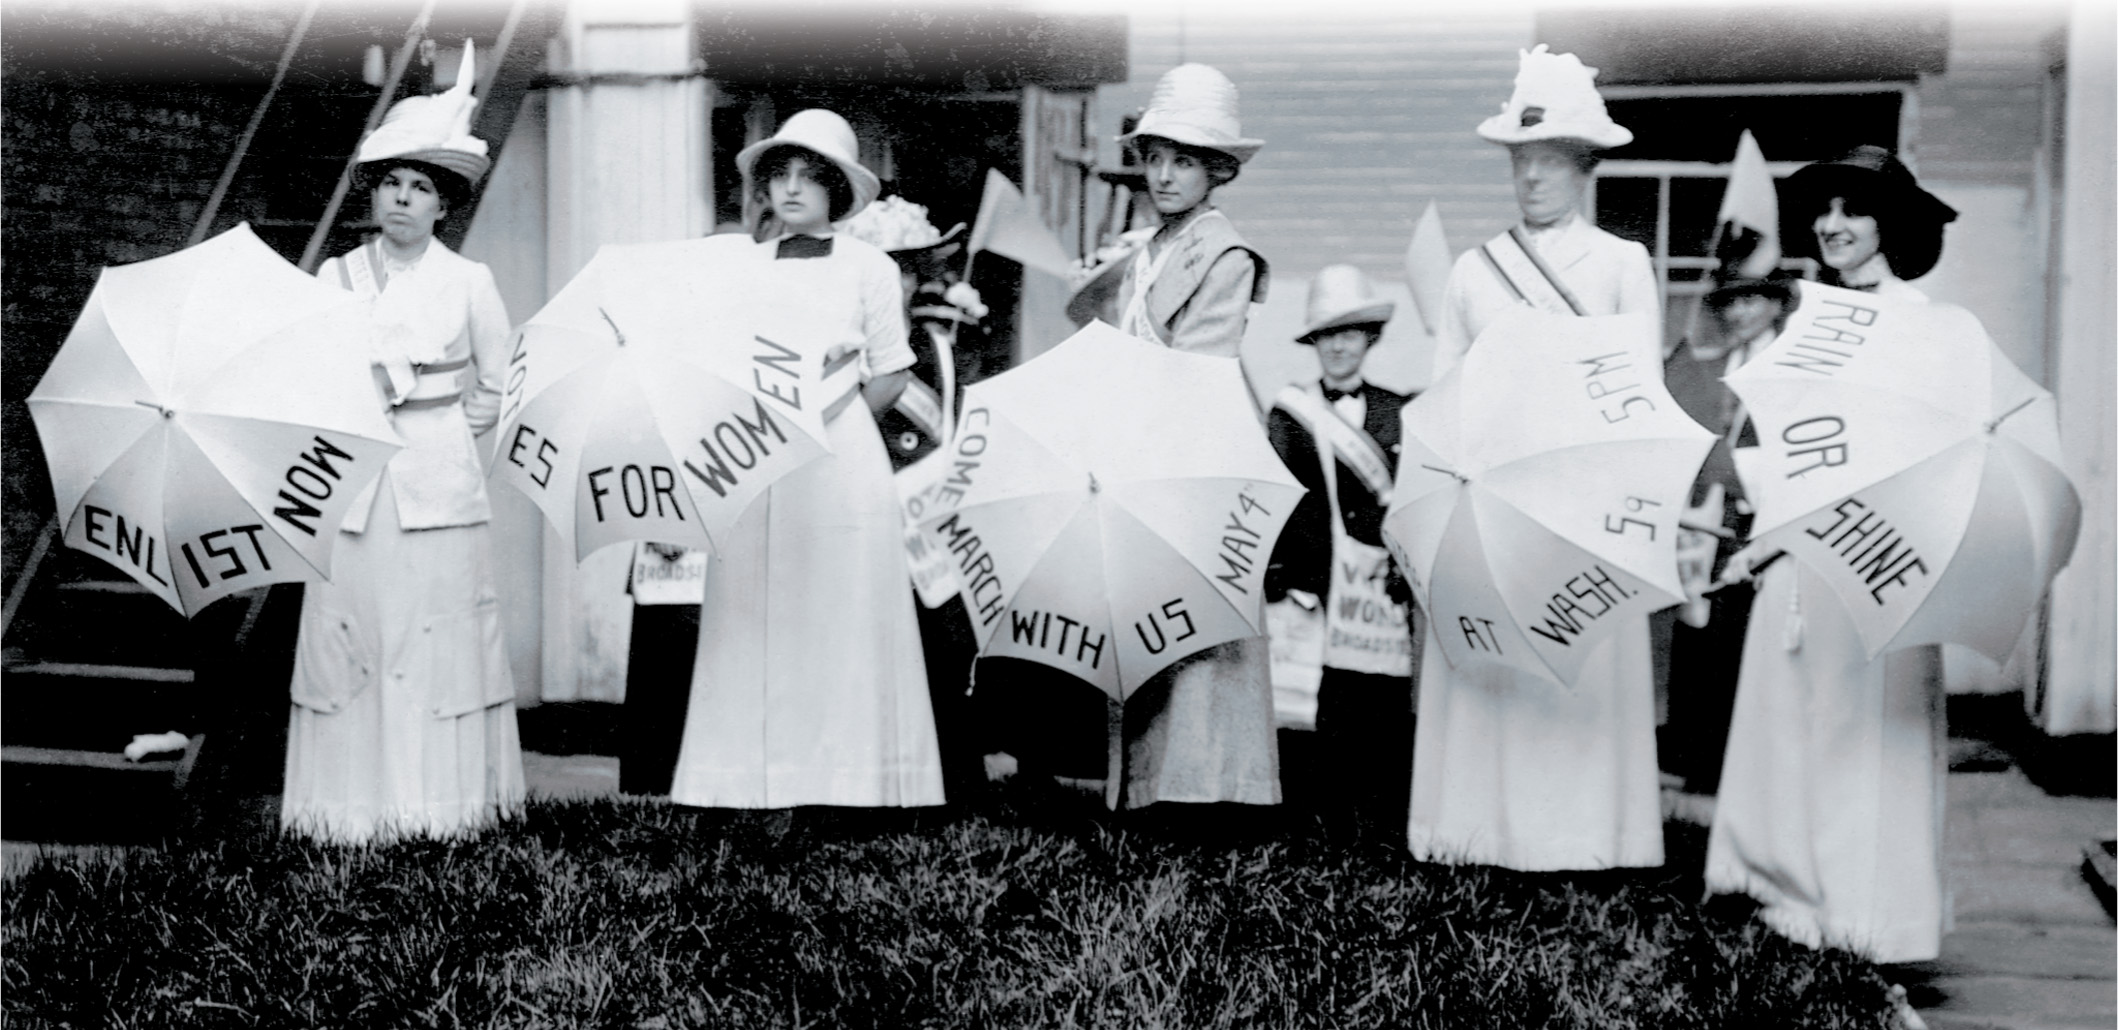 Words on suffragists' umbrellas spell out: Enlist Now. Votes for Women.  Come March with us May 4 at Washington Square, 5:00 p.m.  Rain or shine.